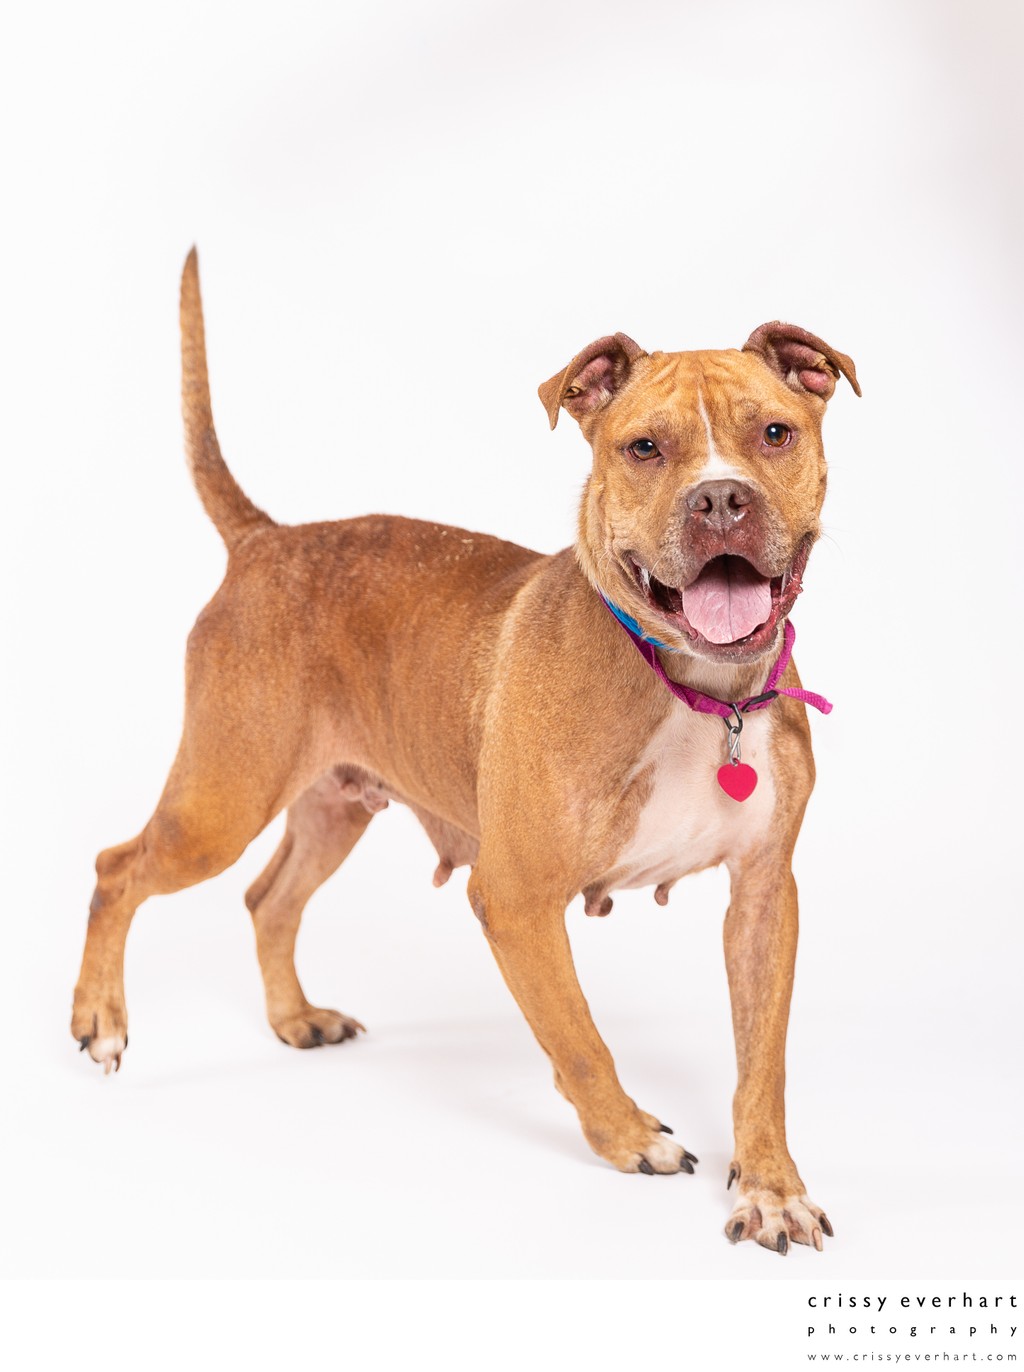 Adoption Photos for Shelter Dogs